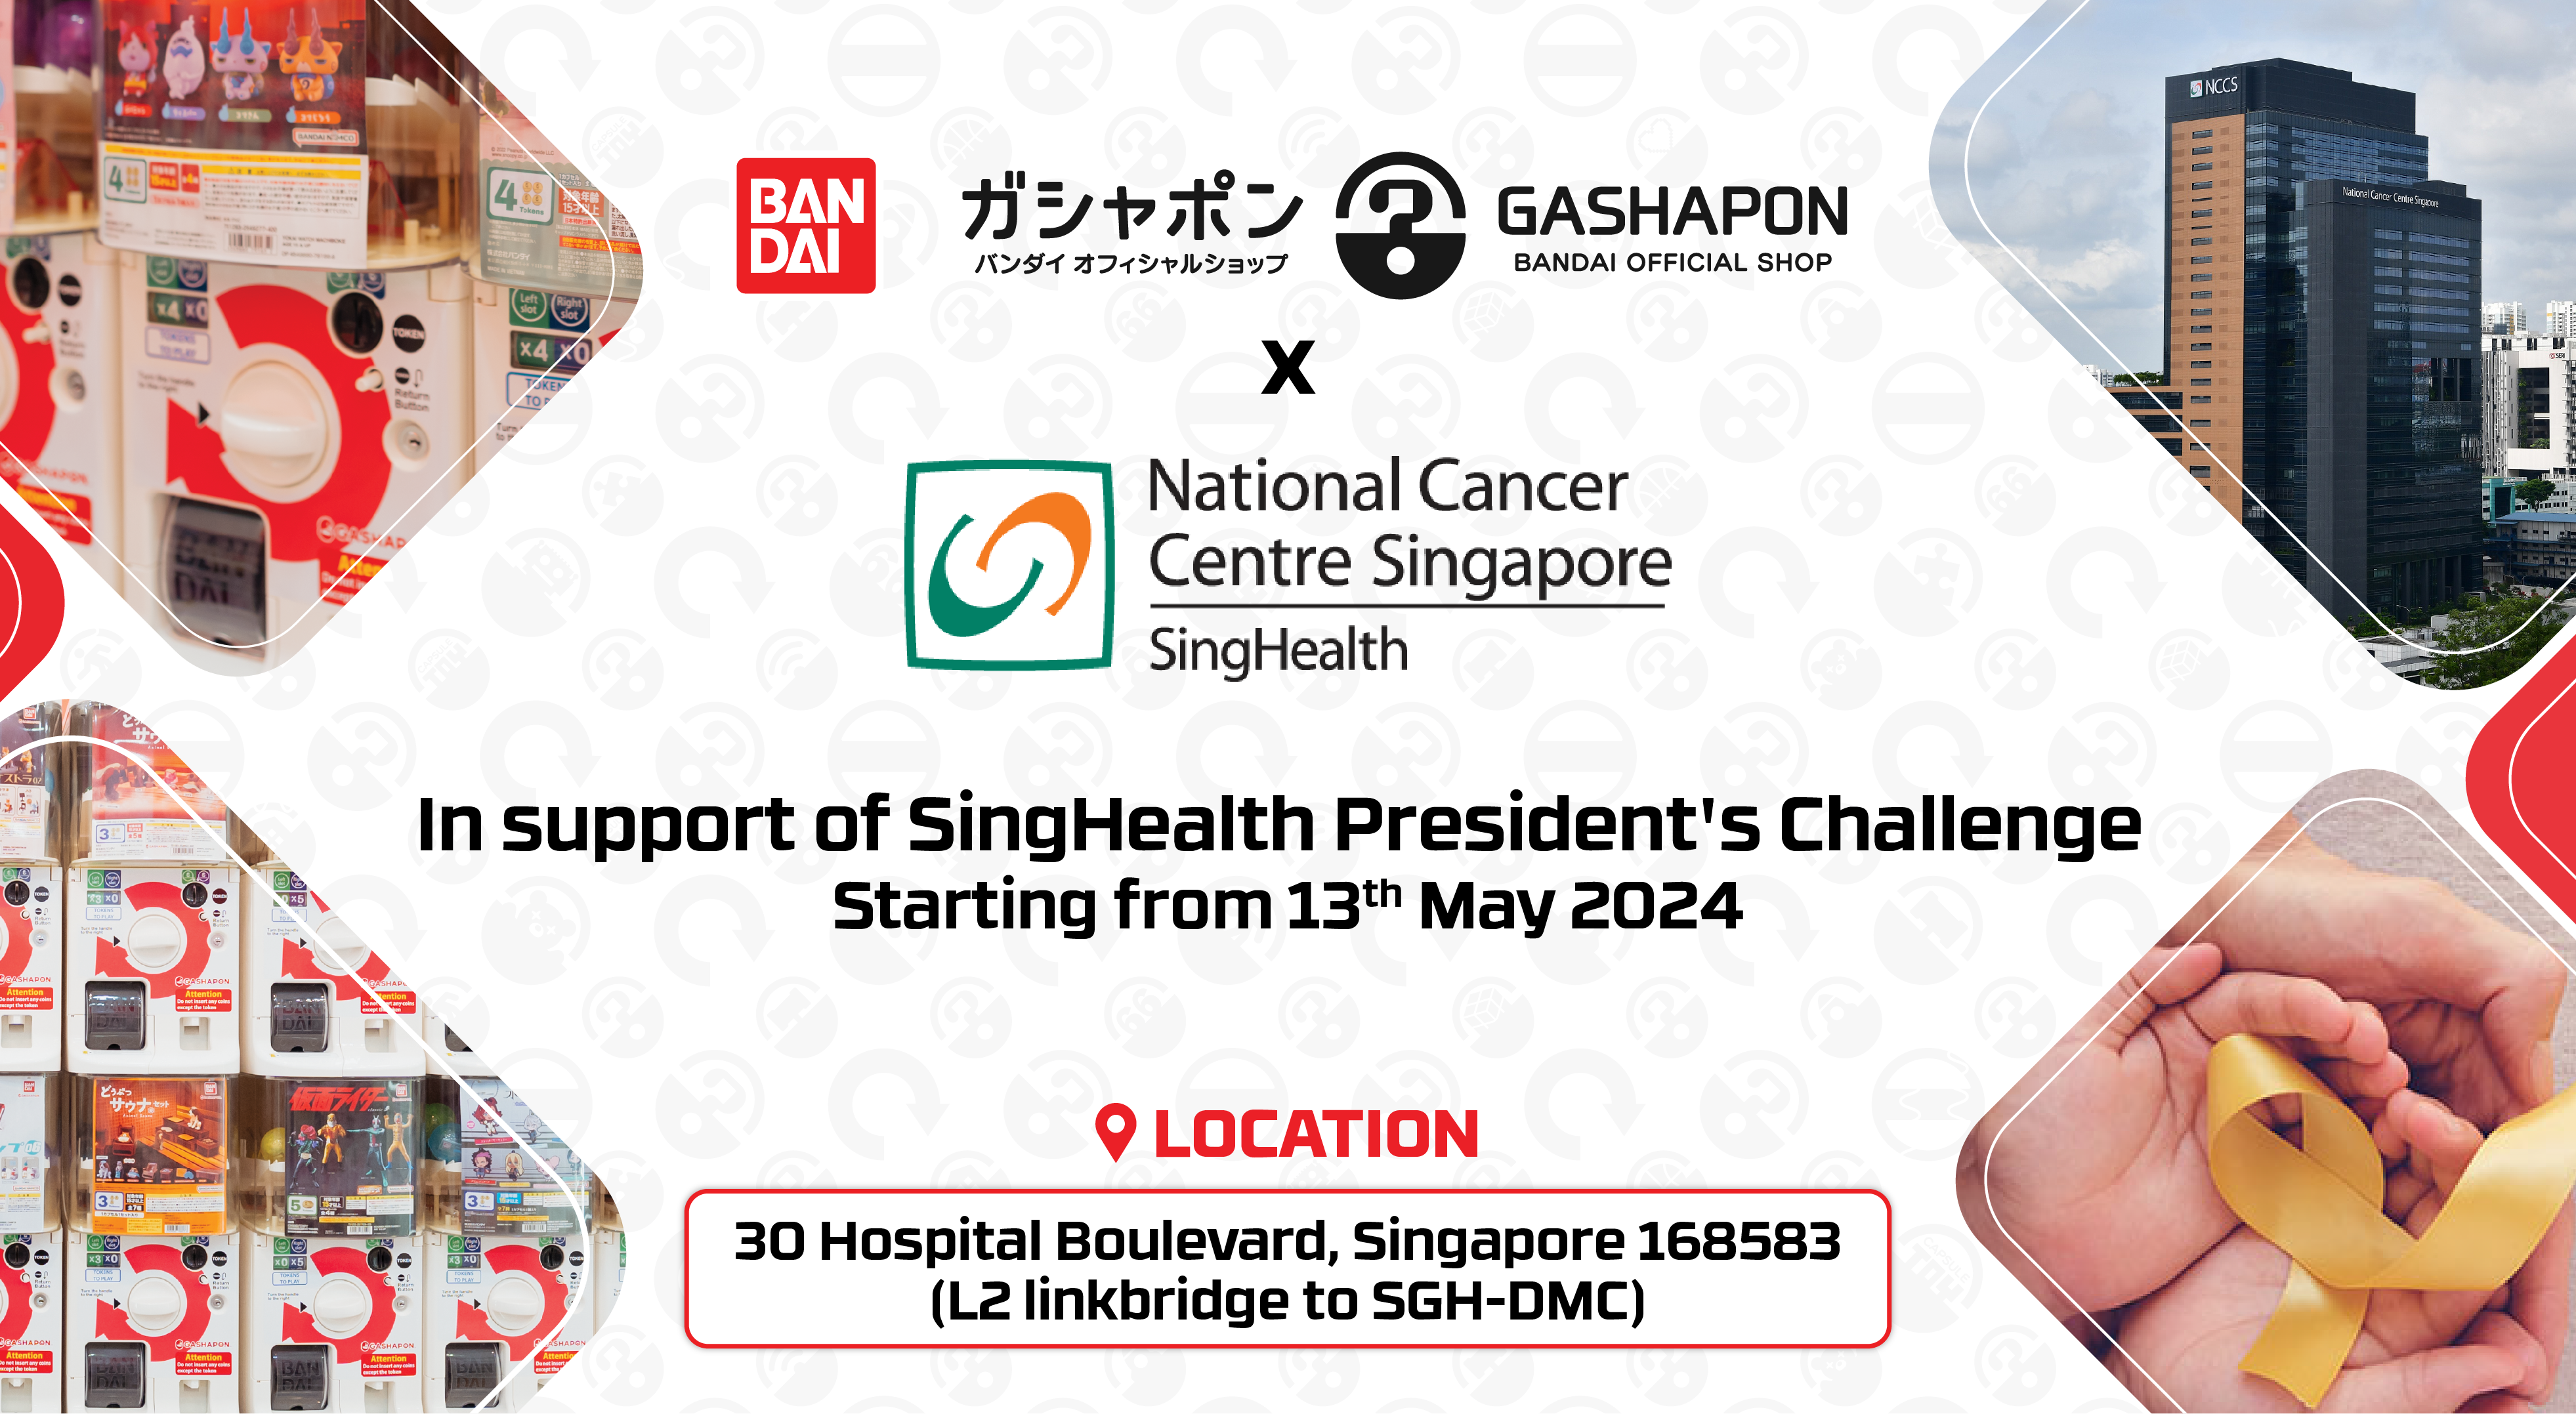 Gashapon Bandai Official Collab Store at National Cancer Centre Singapore